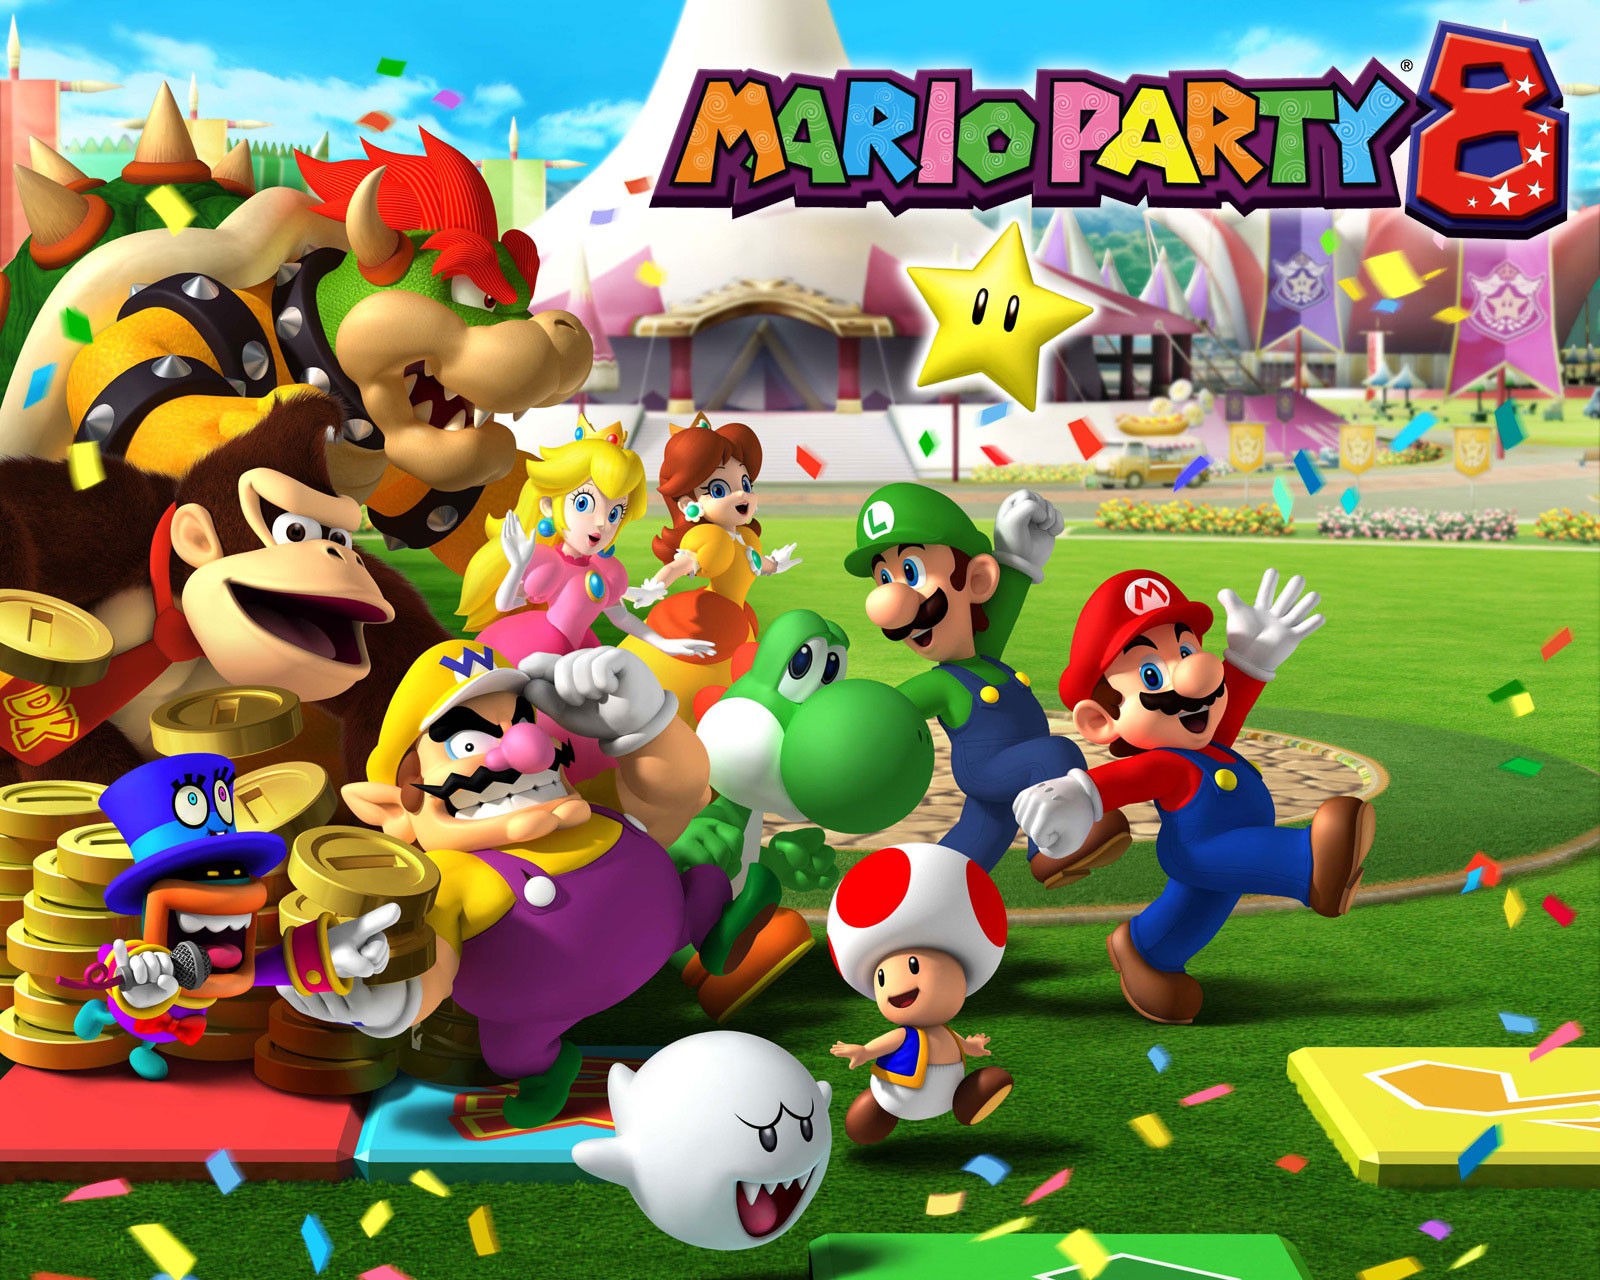 Video Game Mario Party 8 HD Wallpaper | Background Image